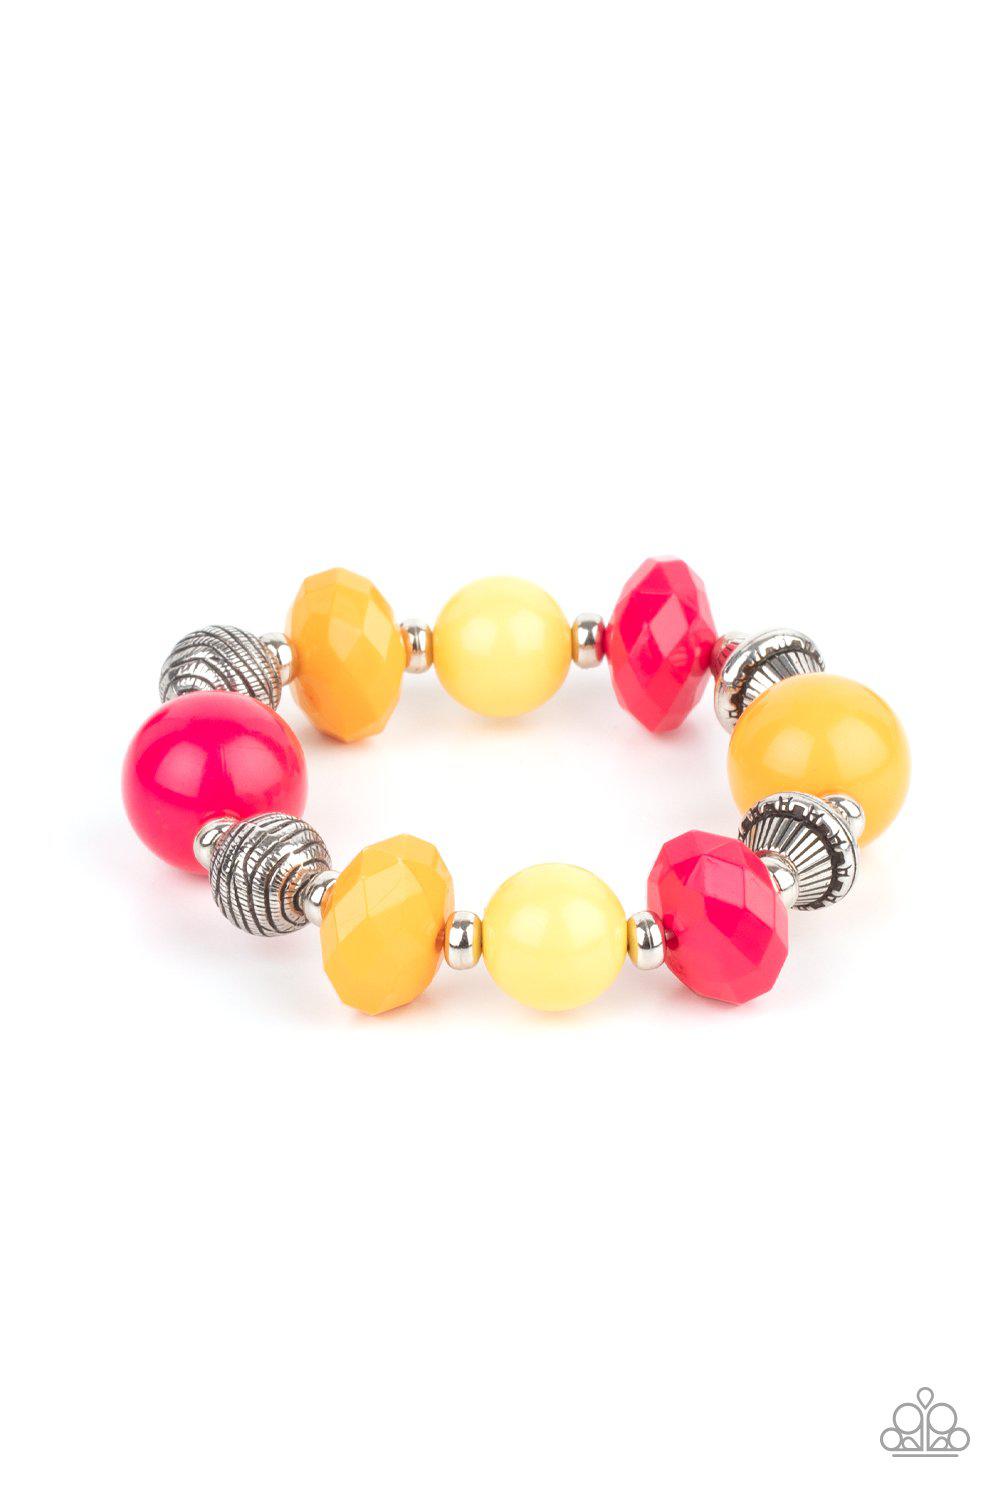 Day Trip Discovery Multi Pink and Yellow Bracelet - Paparazzi Accessories- lightbox - CarasShop.com - $5 Jewelry by Cara Jewels